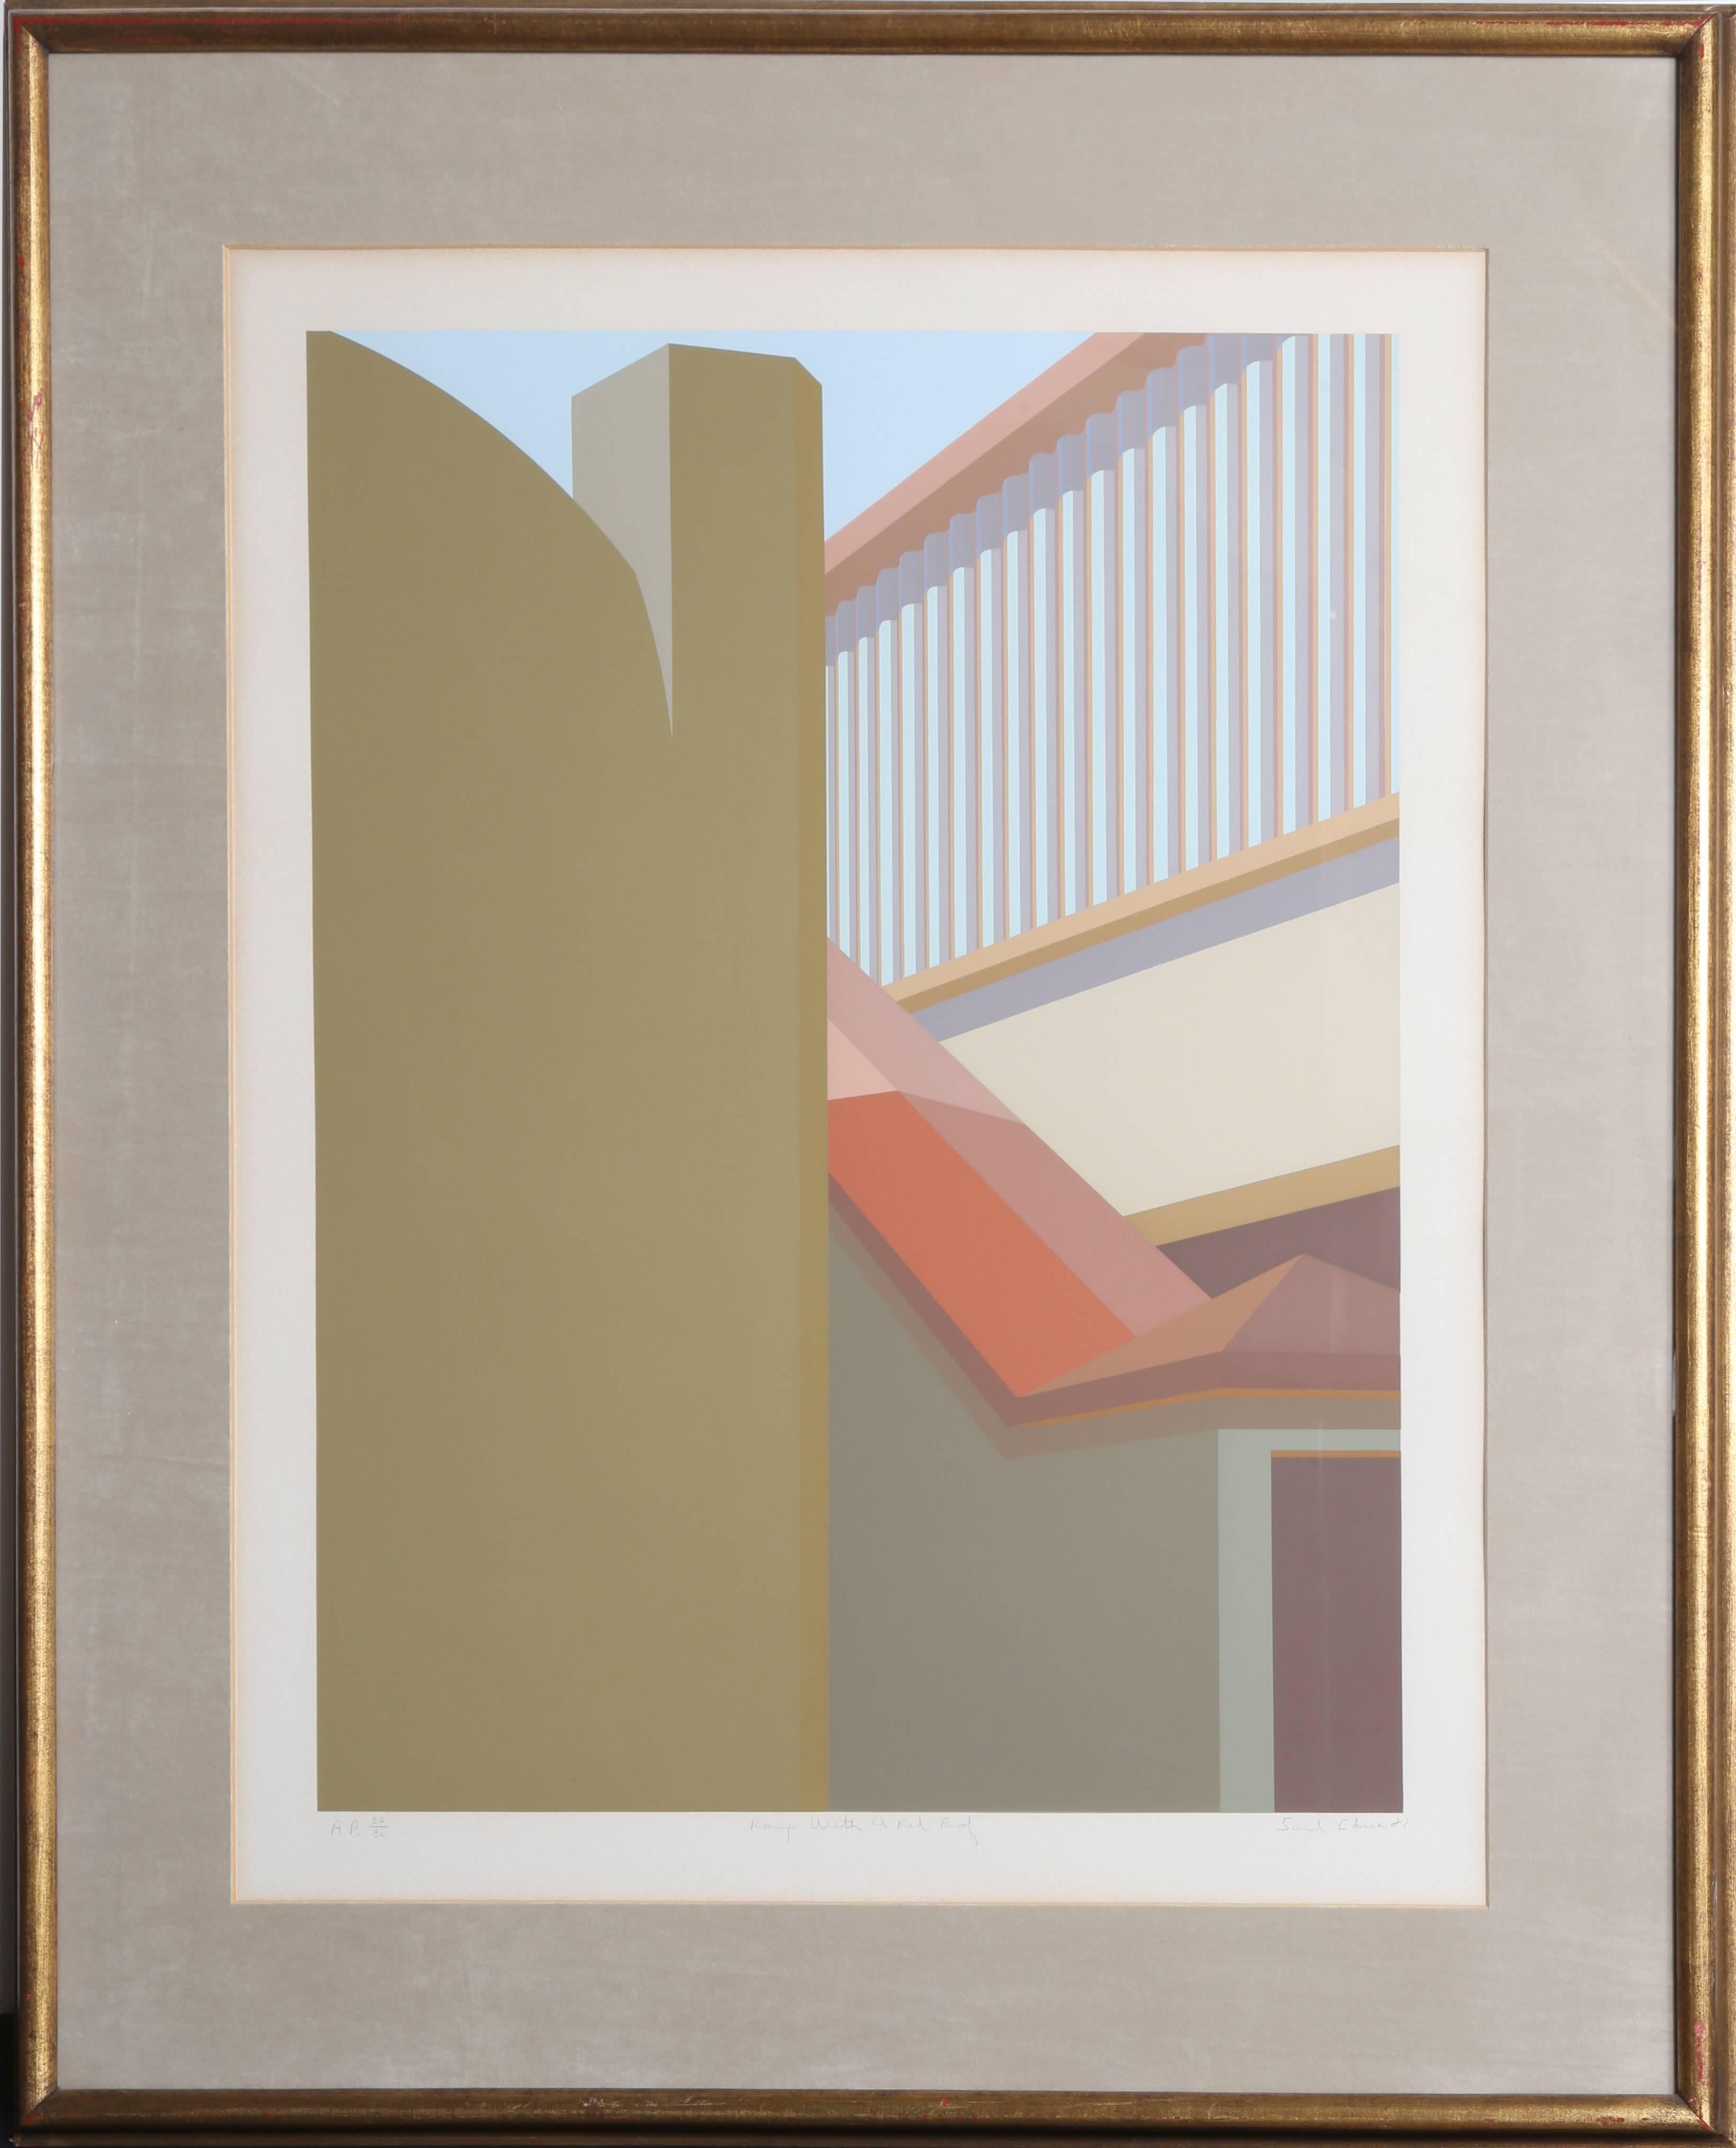 Ramp with a Red Roof, Photorealist Screenprint by Saul Chase